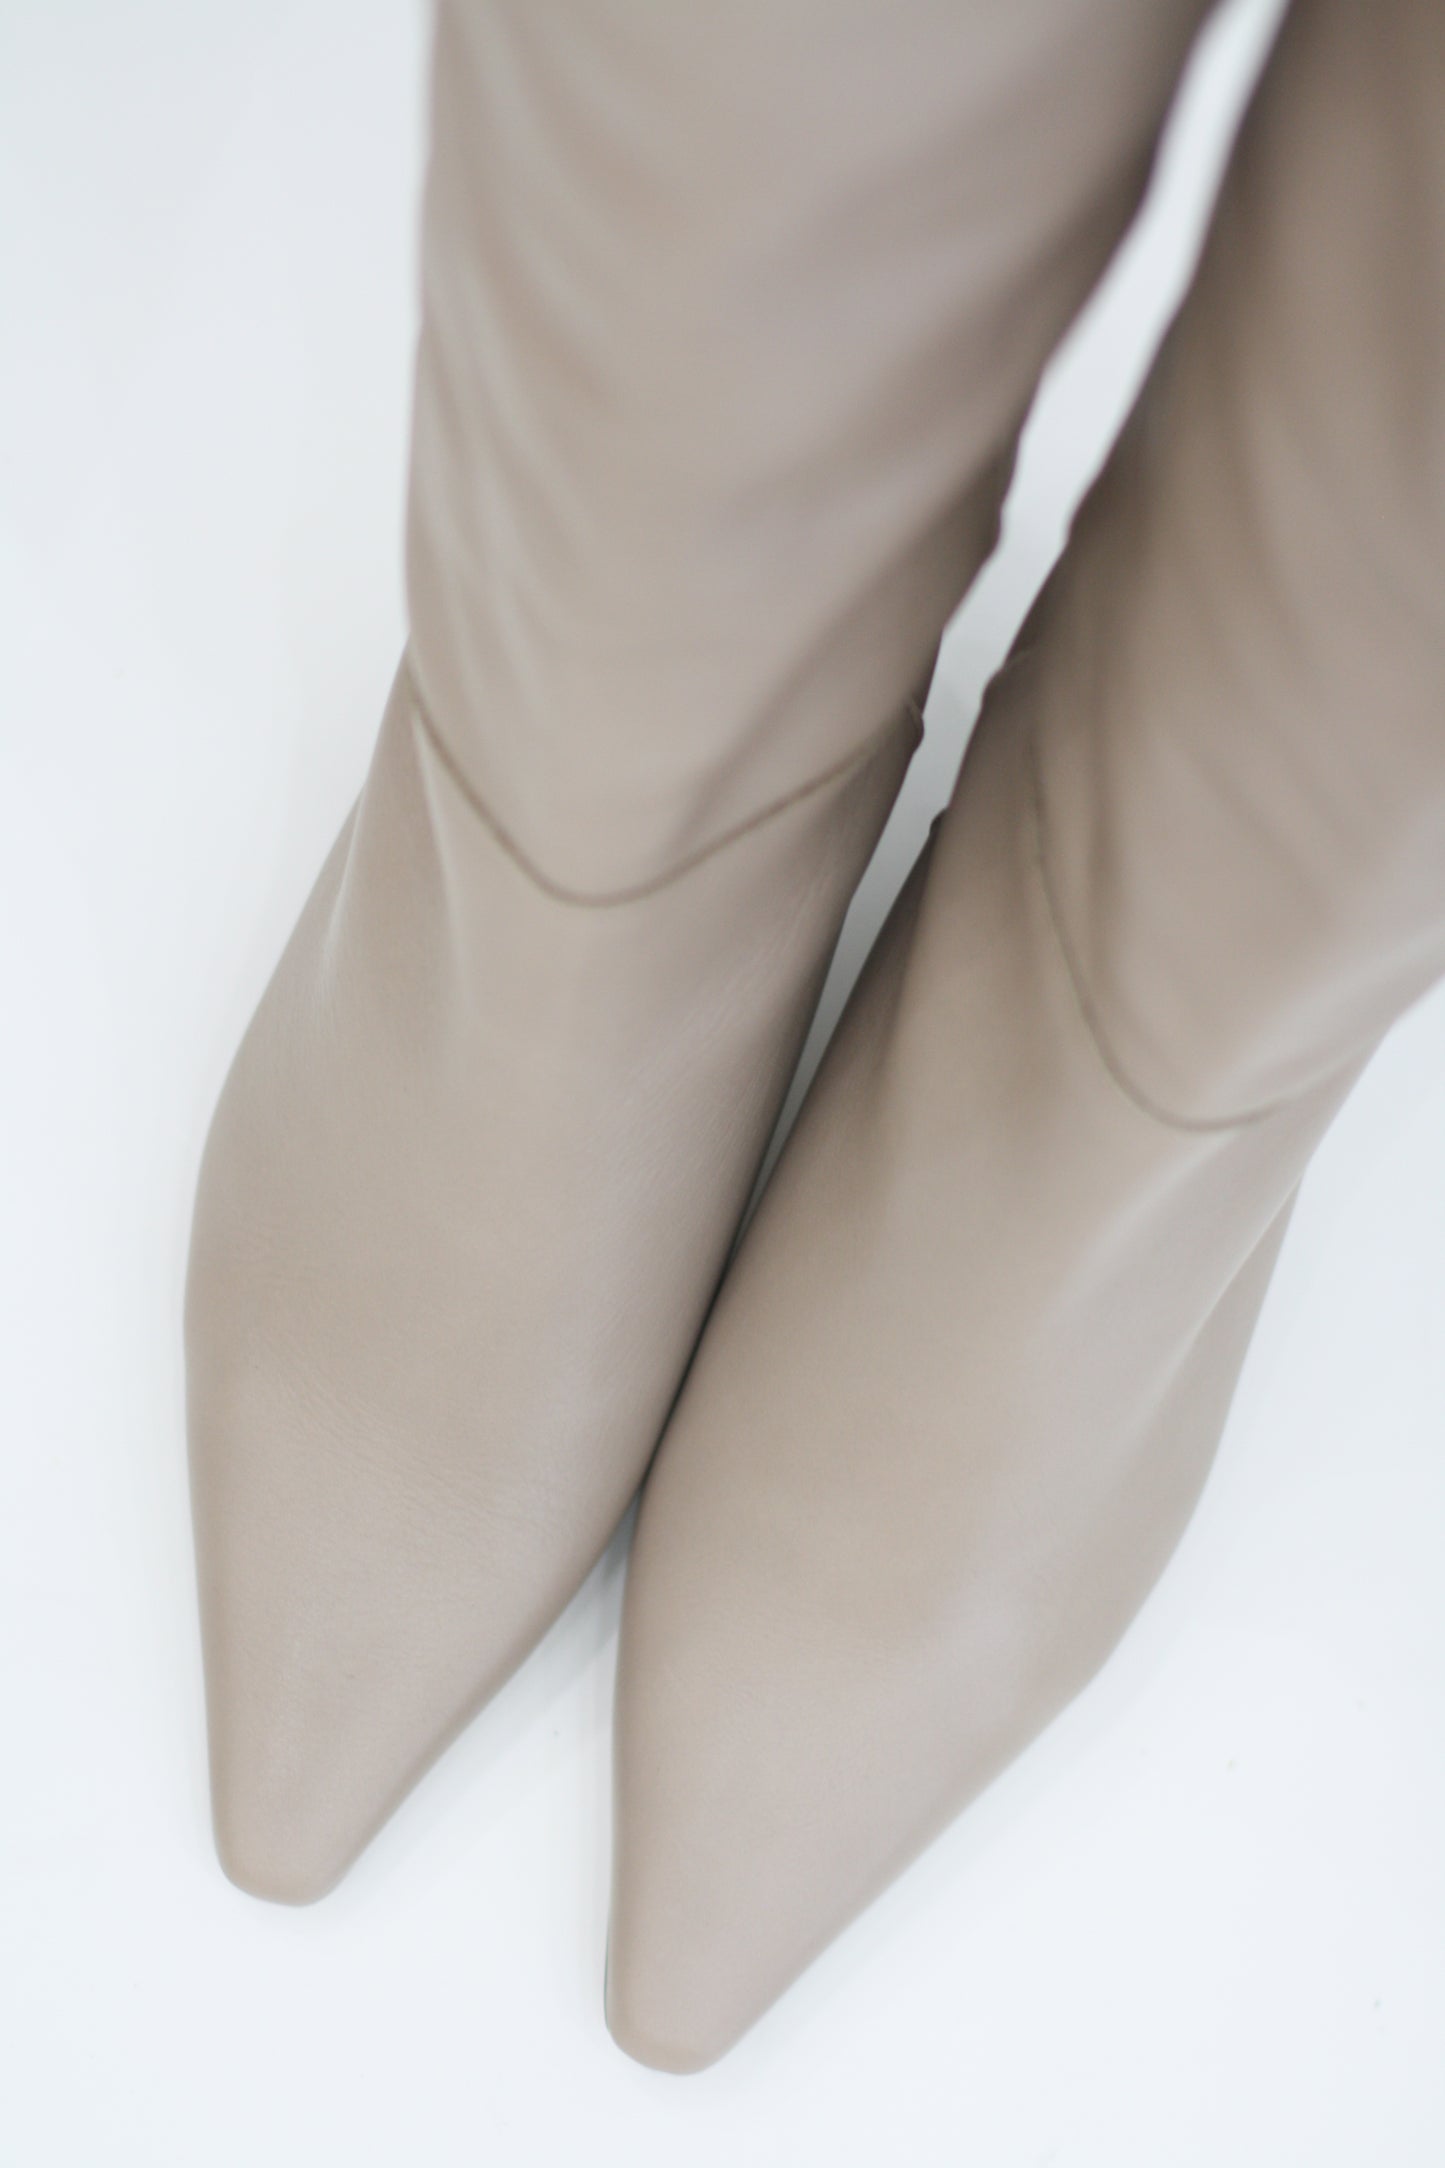 ANGEL ALARCON UMAY TAUPE LEATHER KNEE HIGH BOOT